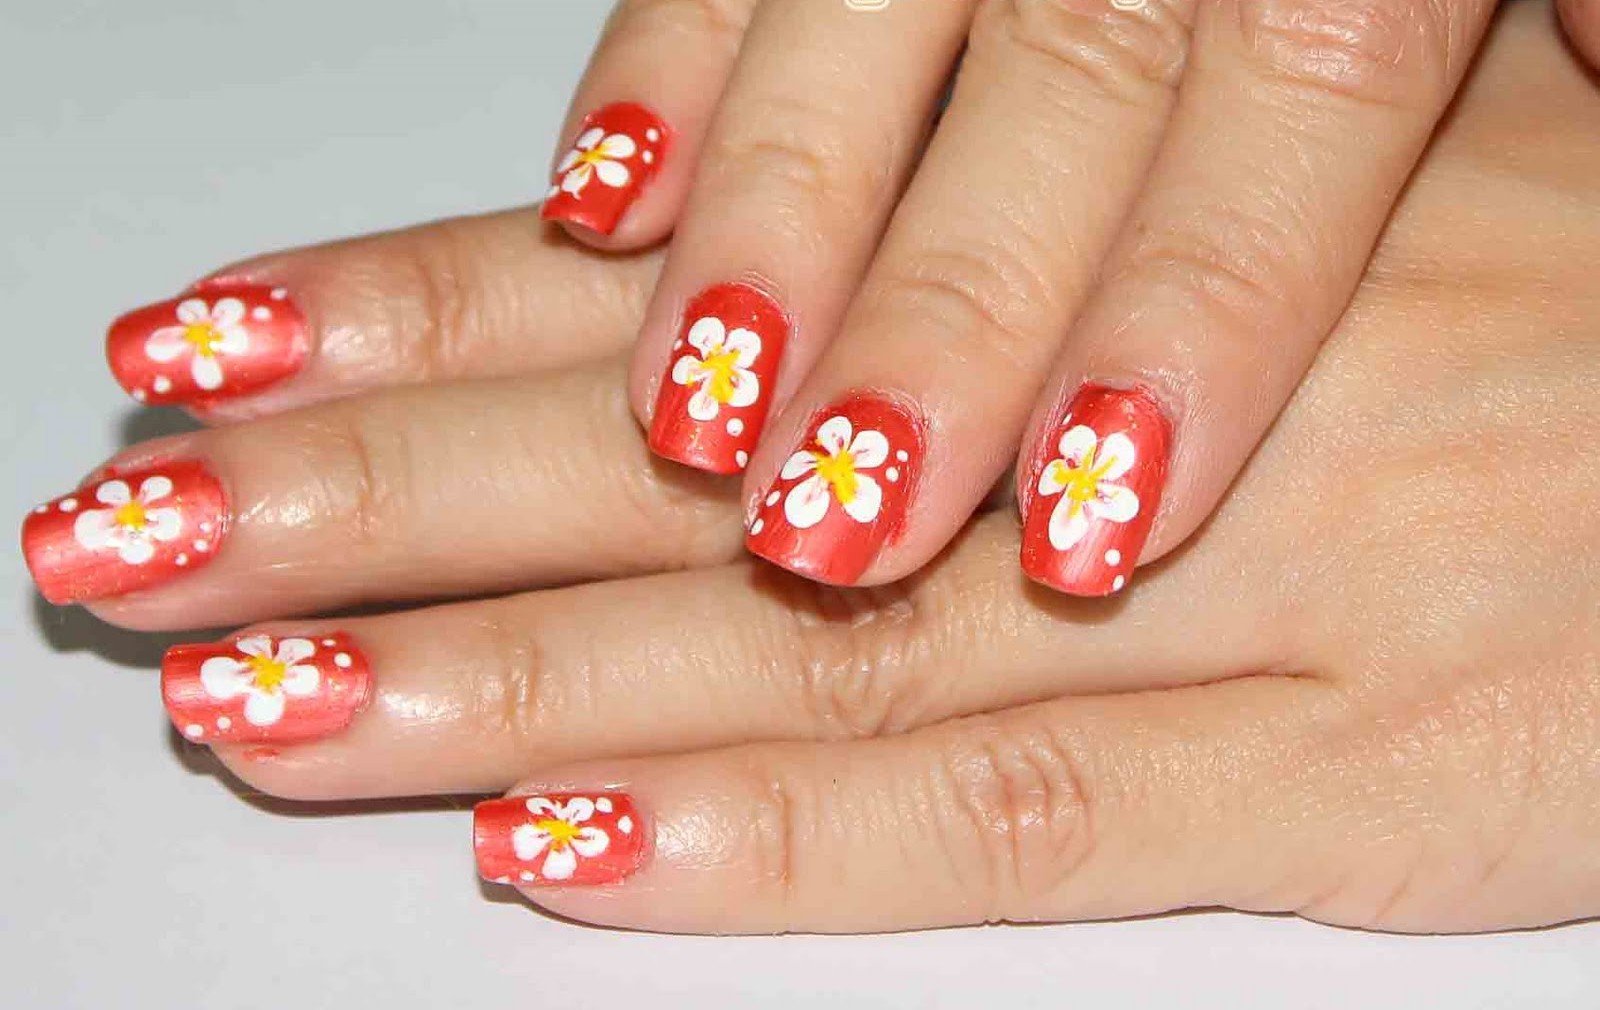 Nail Art Tutorial for Beginners without Tools - wide 6